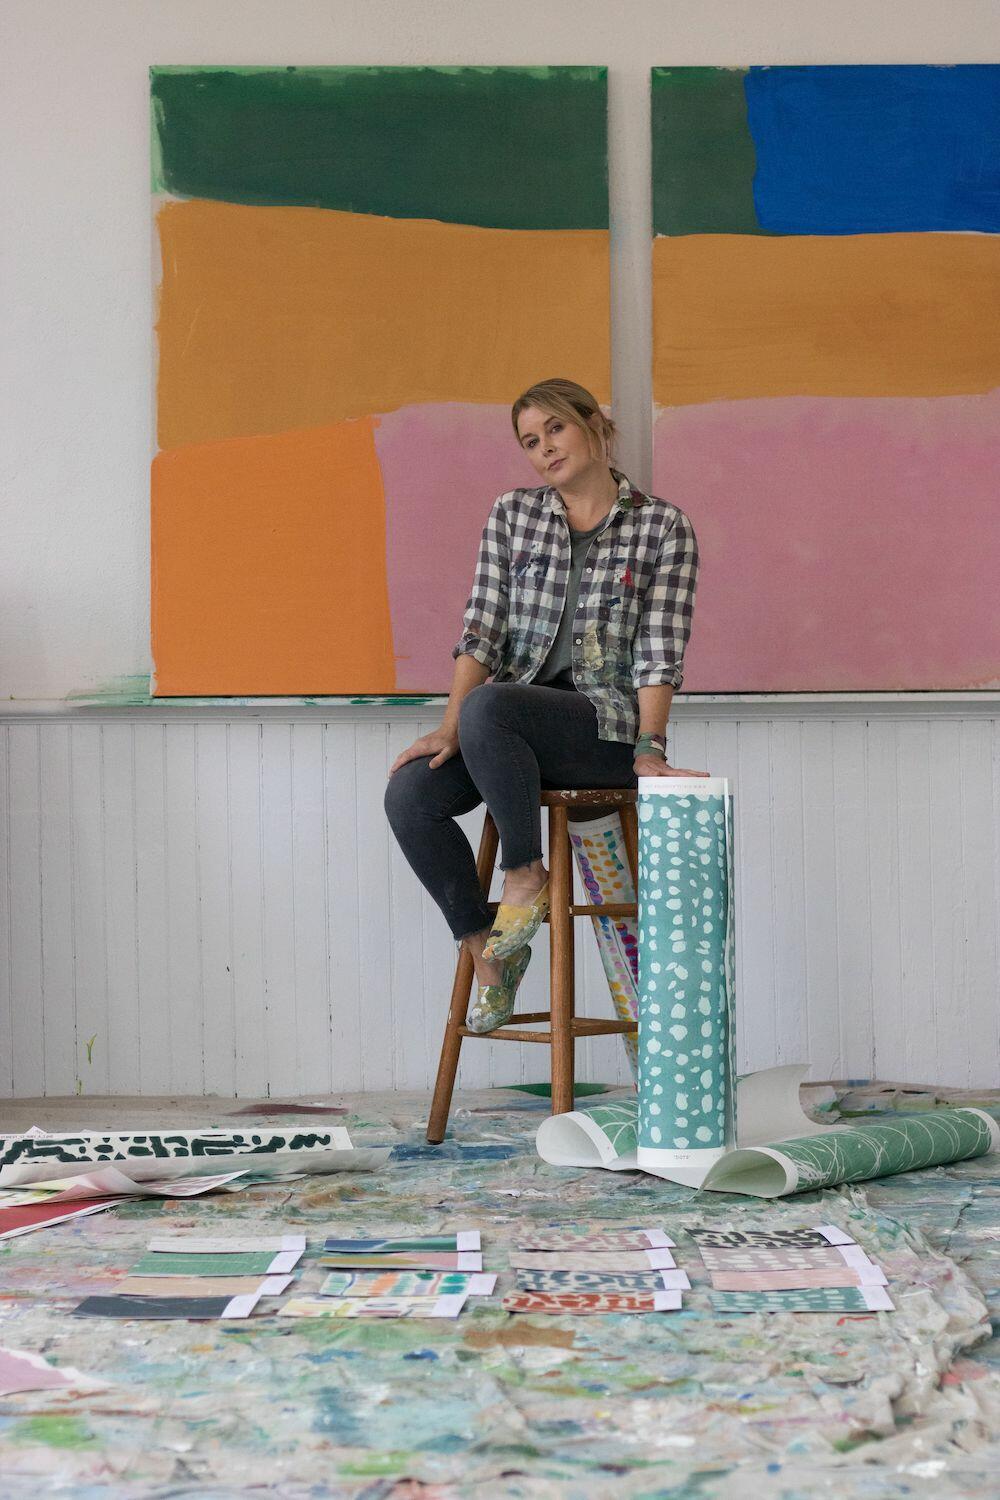 This textile designer wants to take art beyond the canvas